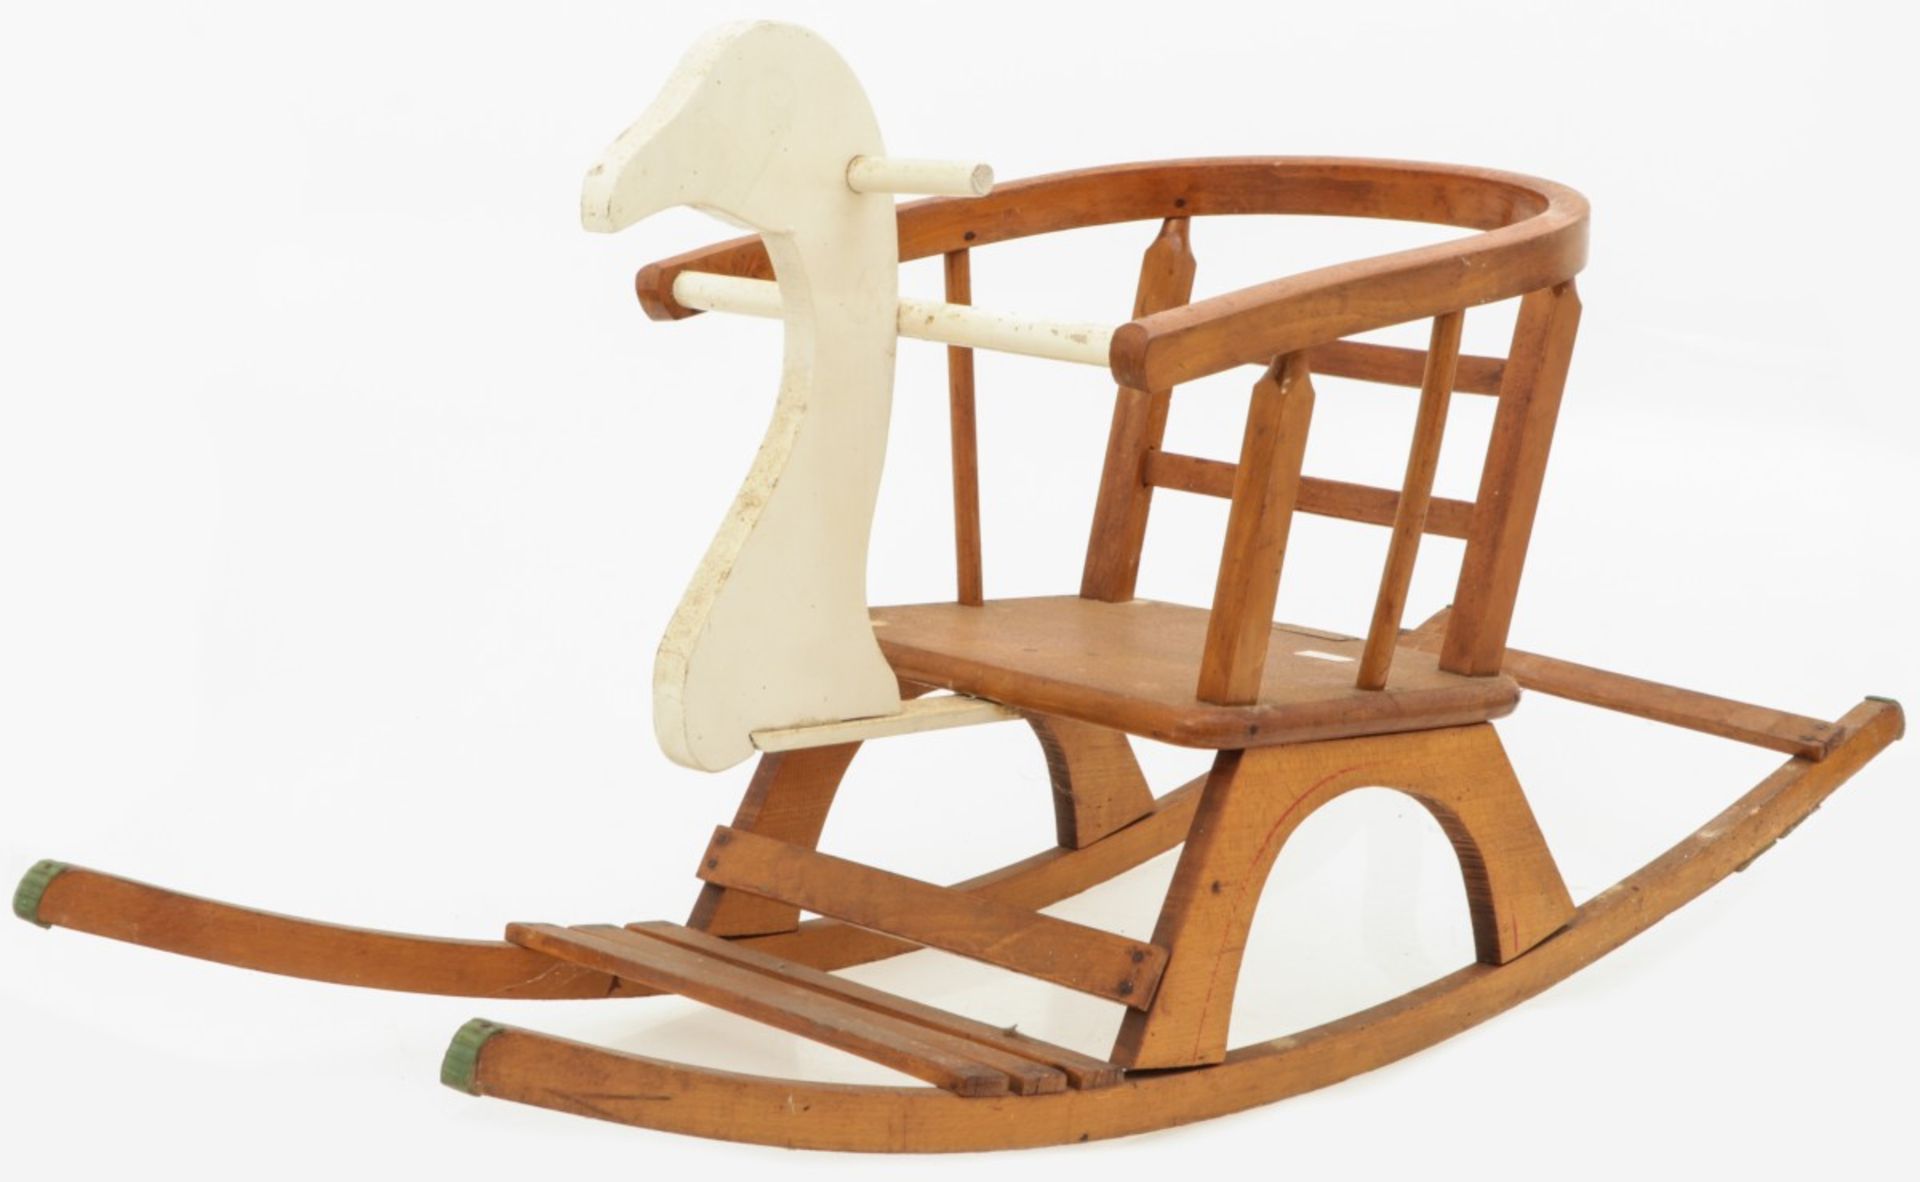 A childs' chair/ rocking horse, 20th century.